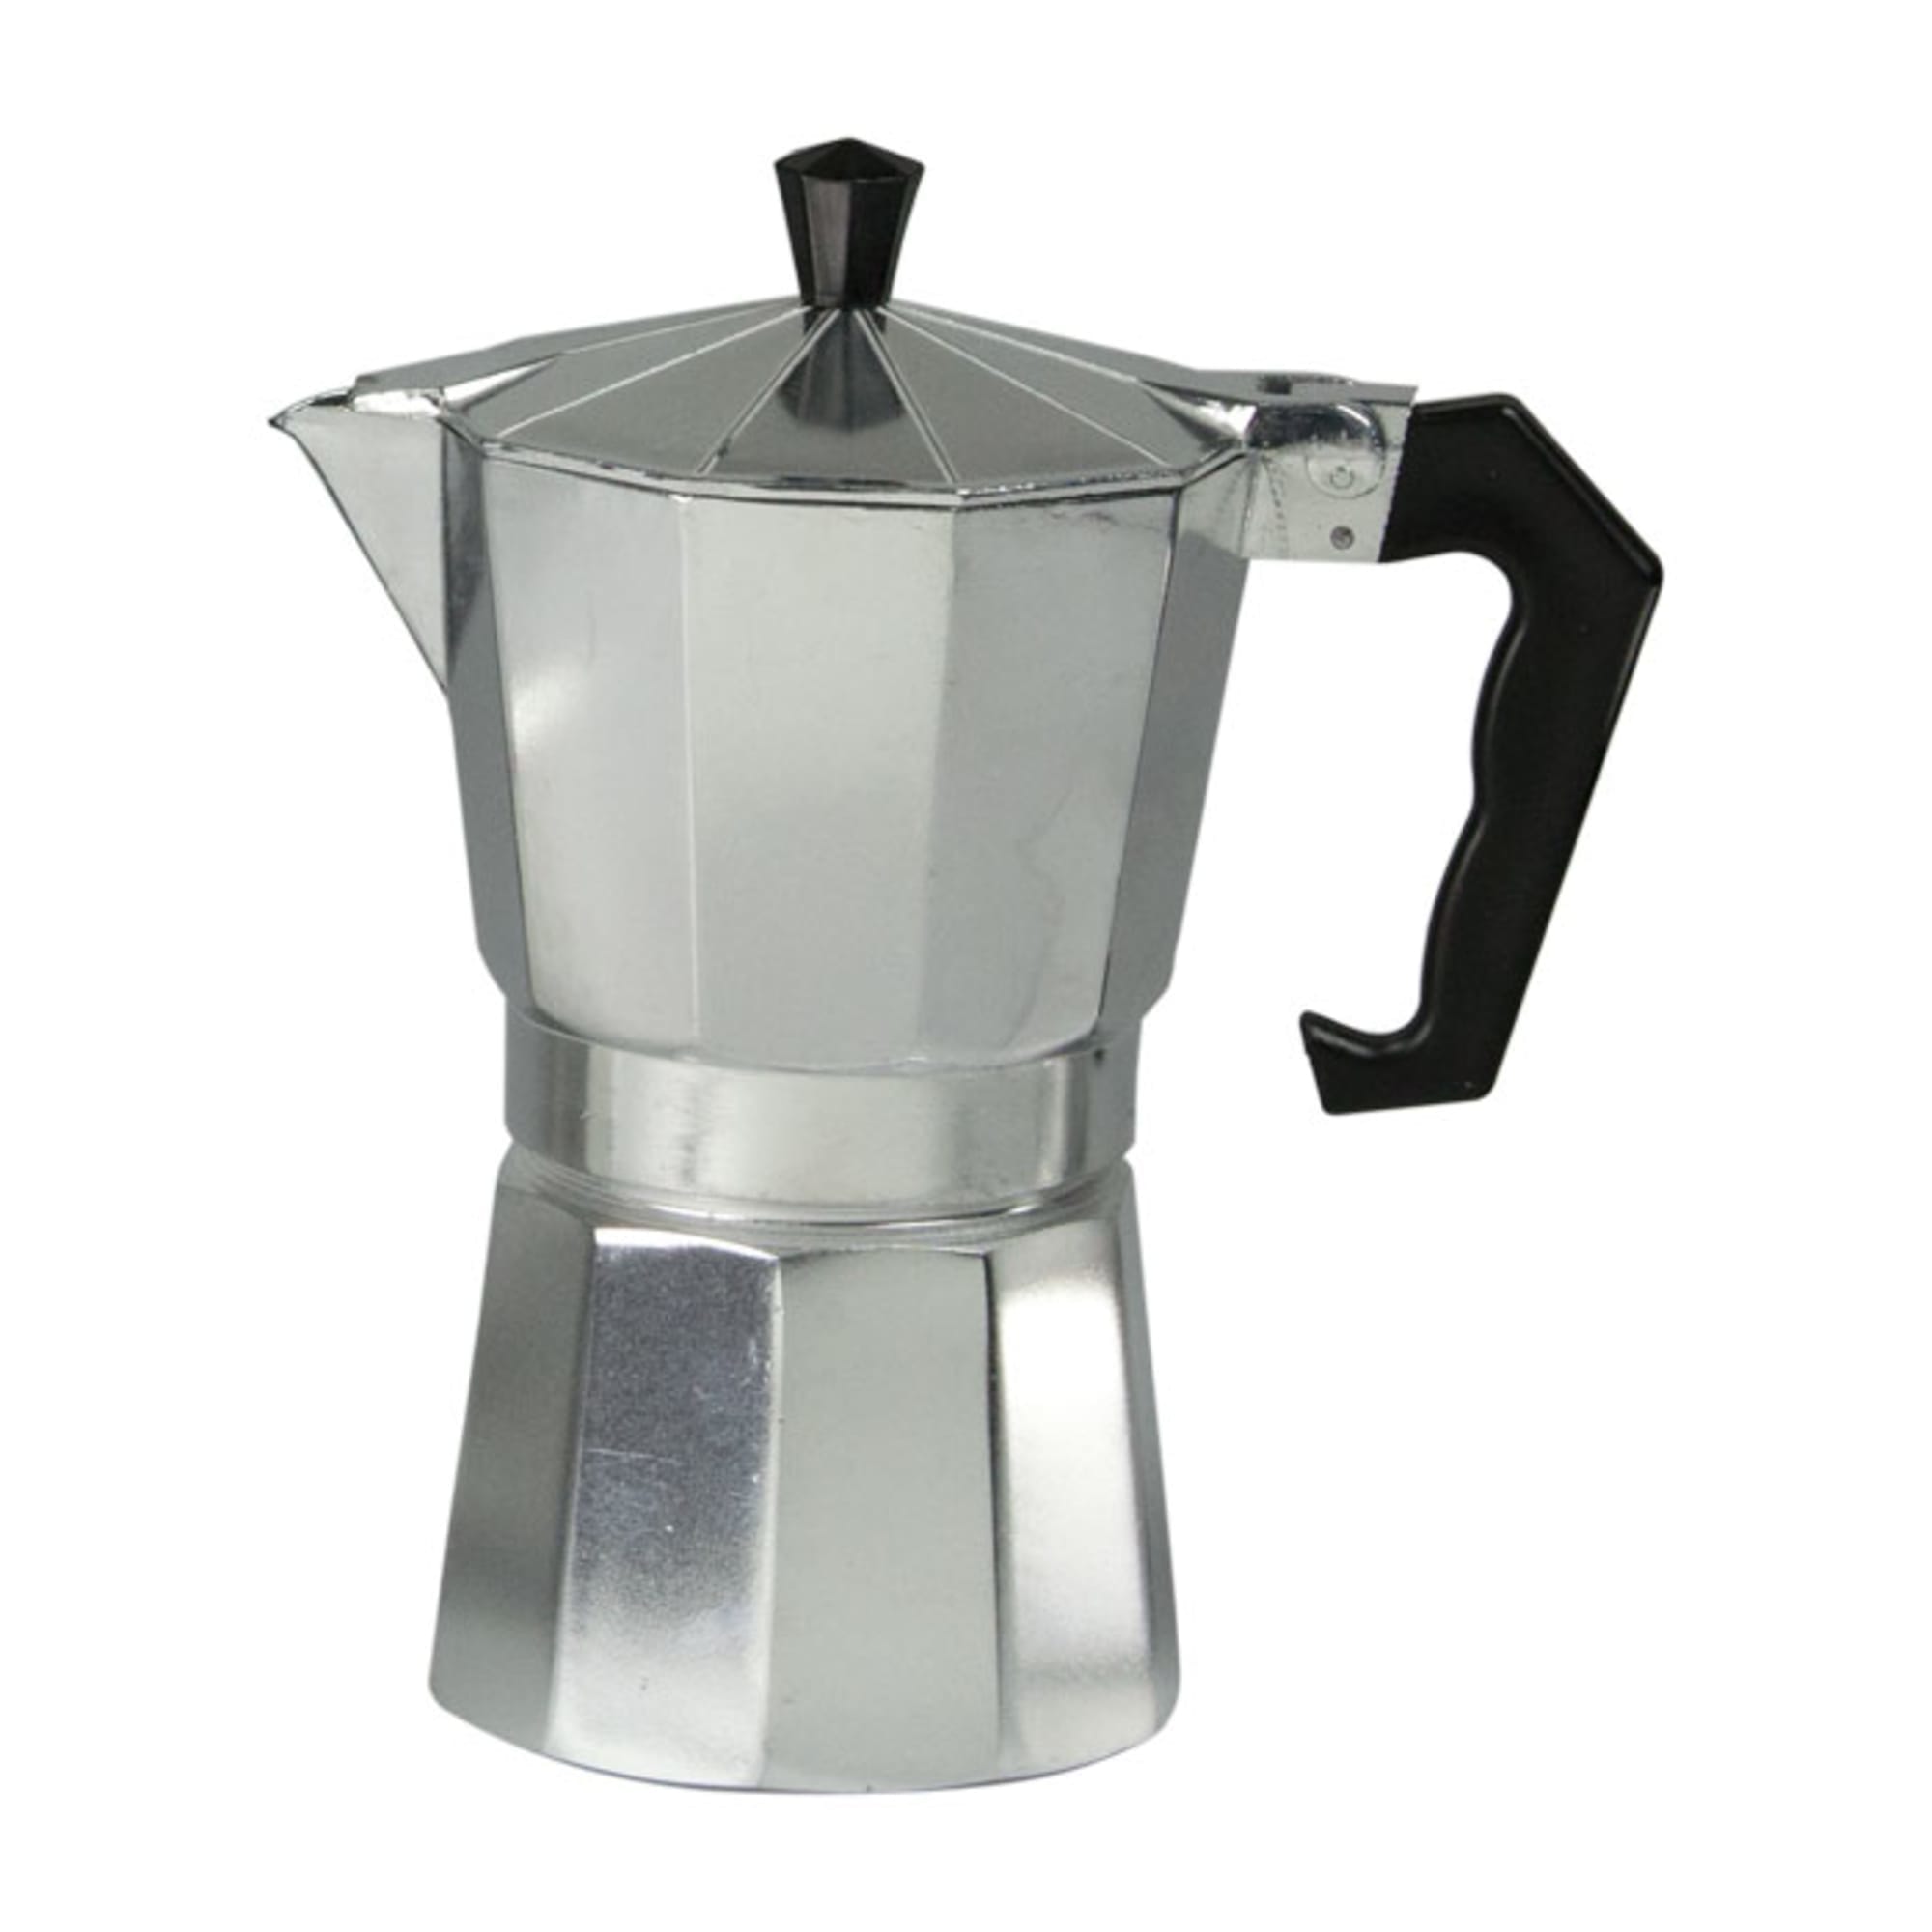 6 Cup Electric Espresso Coffee Maker at 40% Less Price